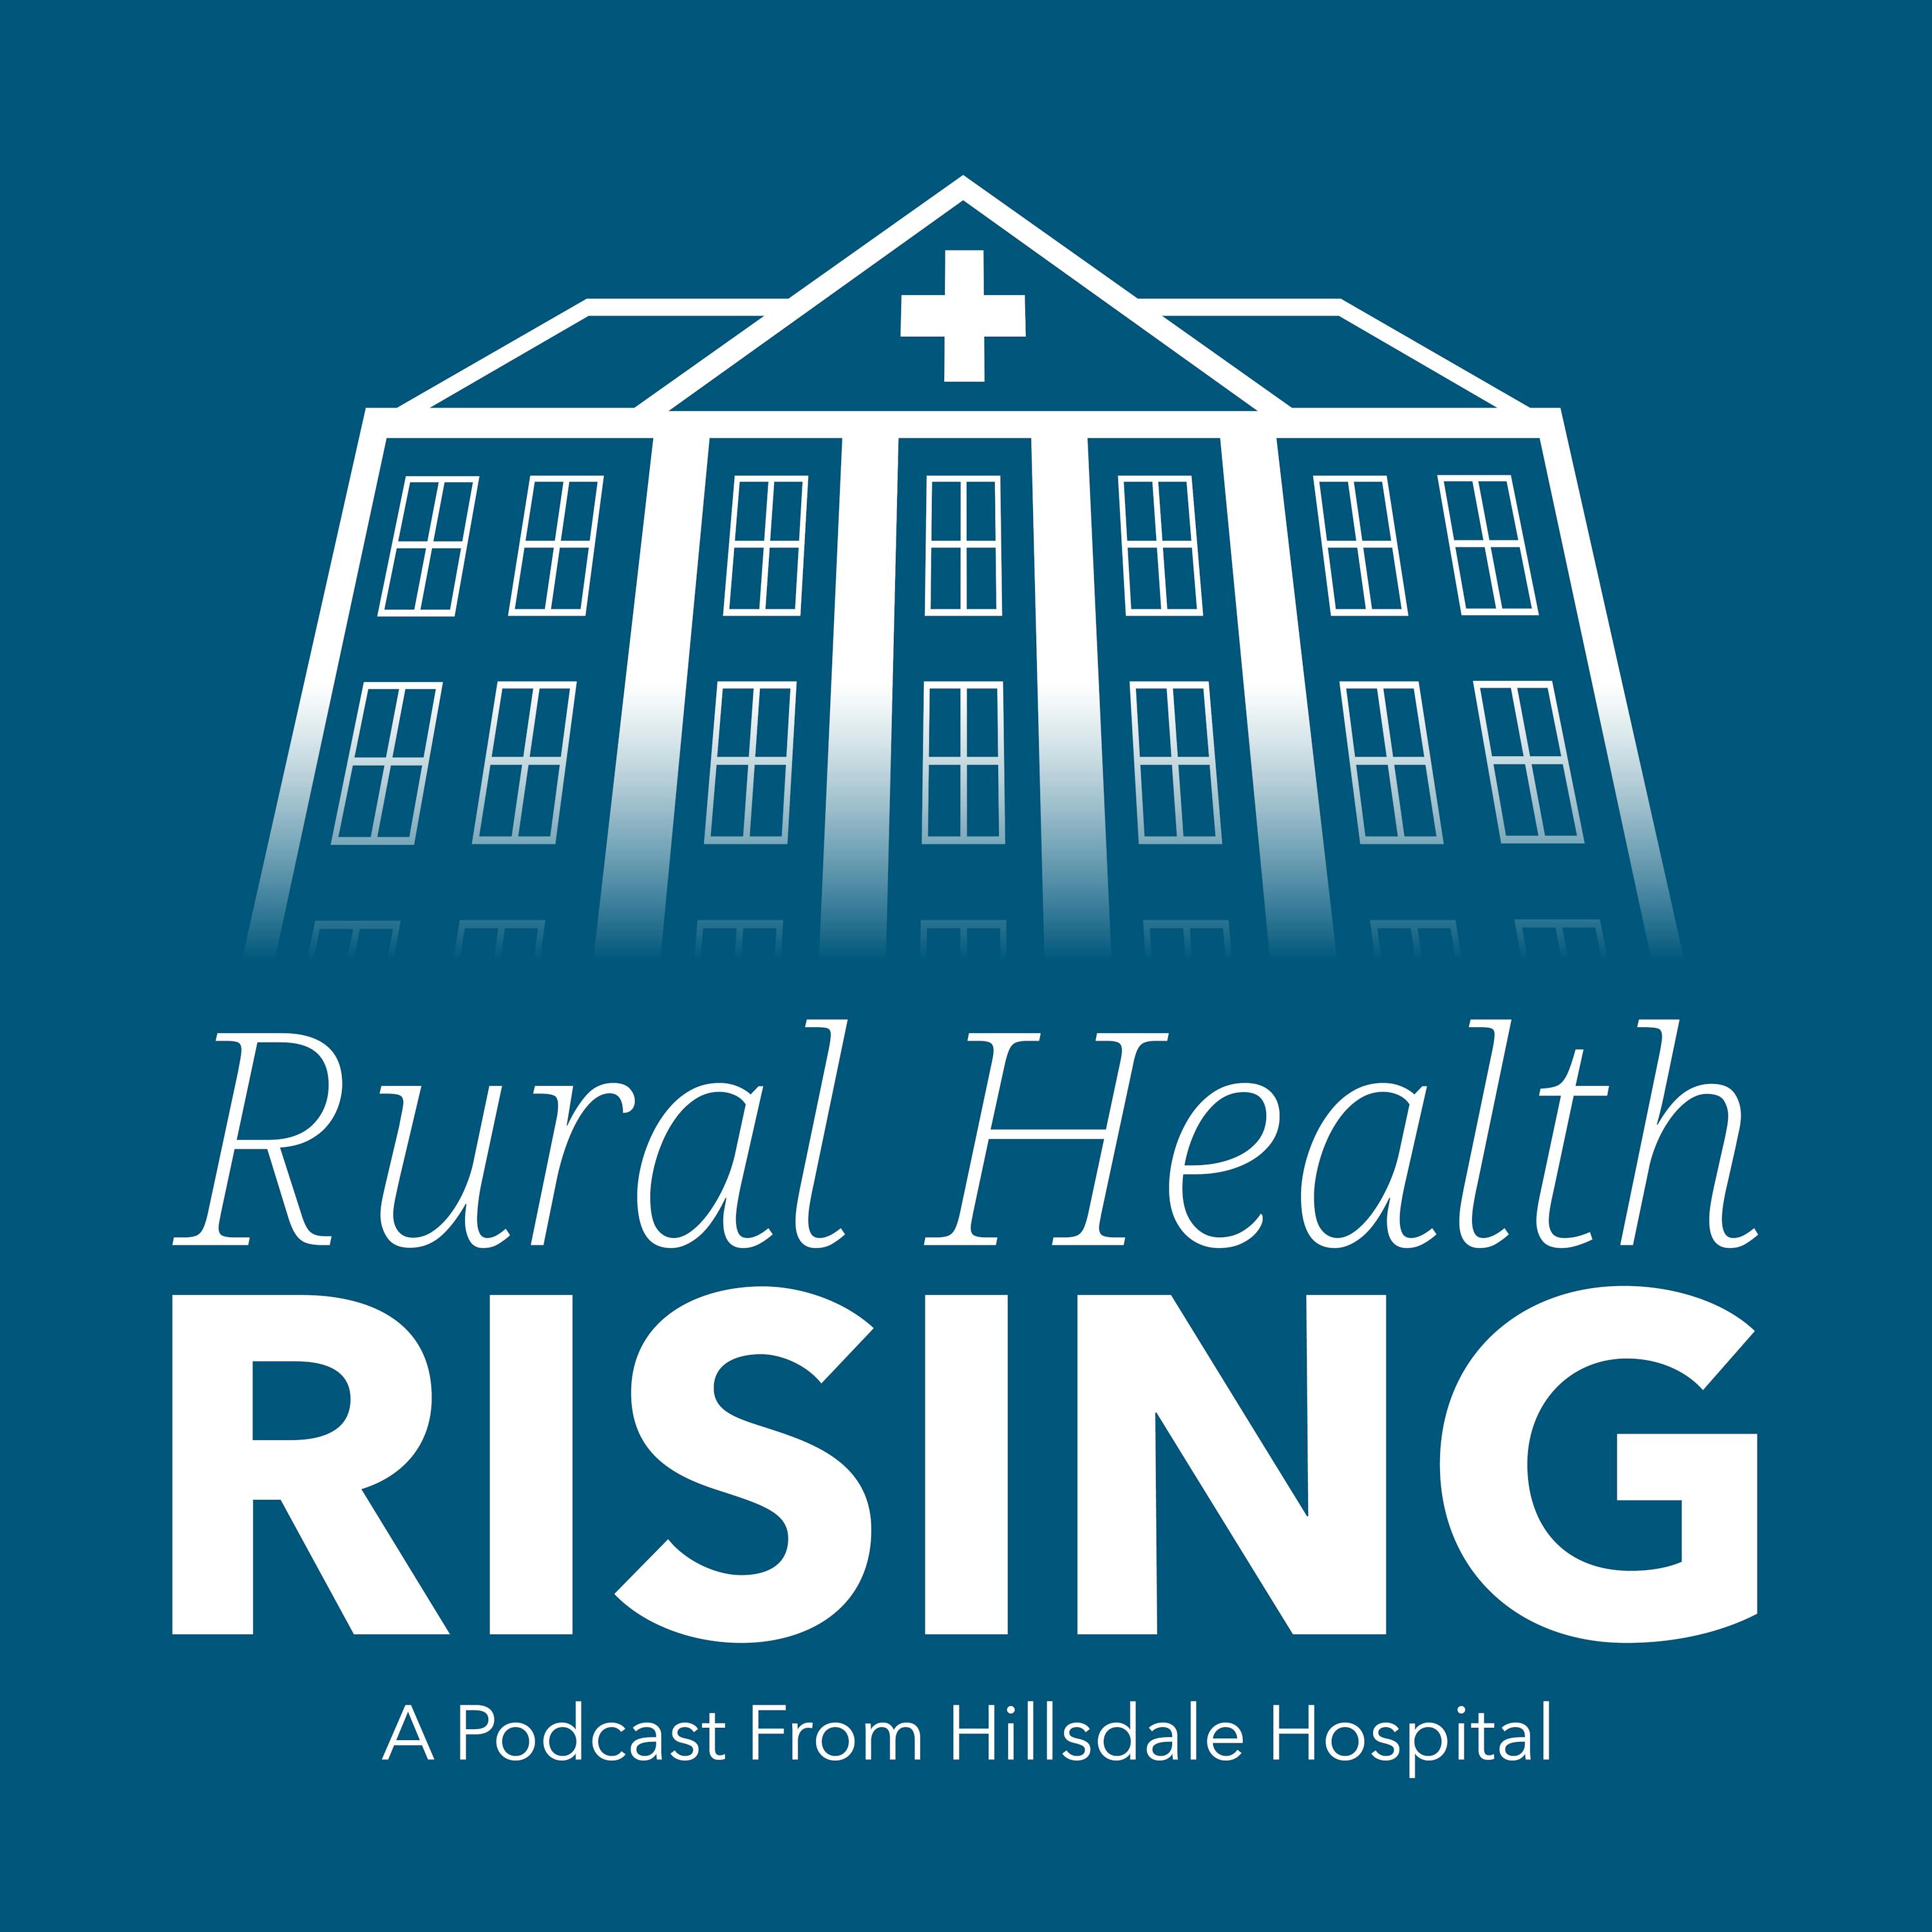 Episode 105: USDA and Healthcare